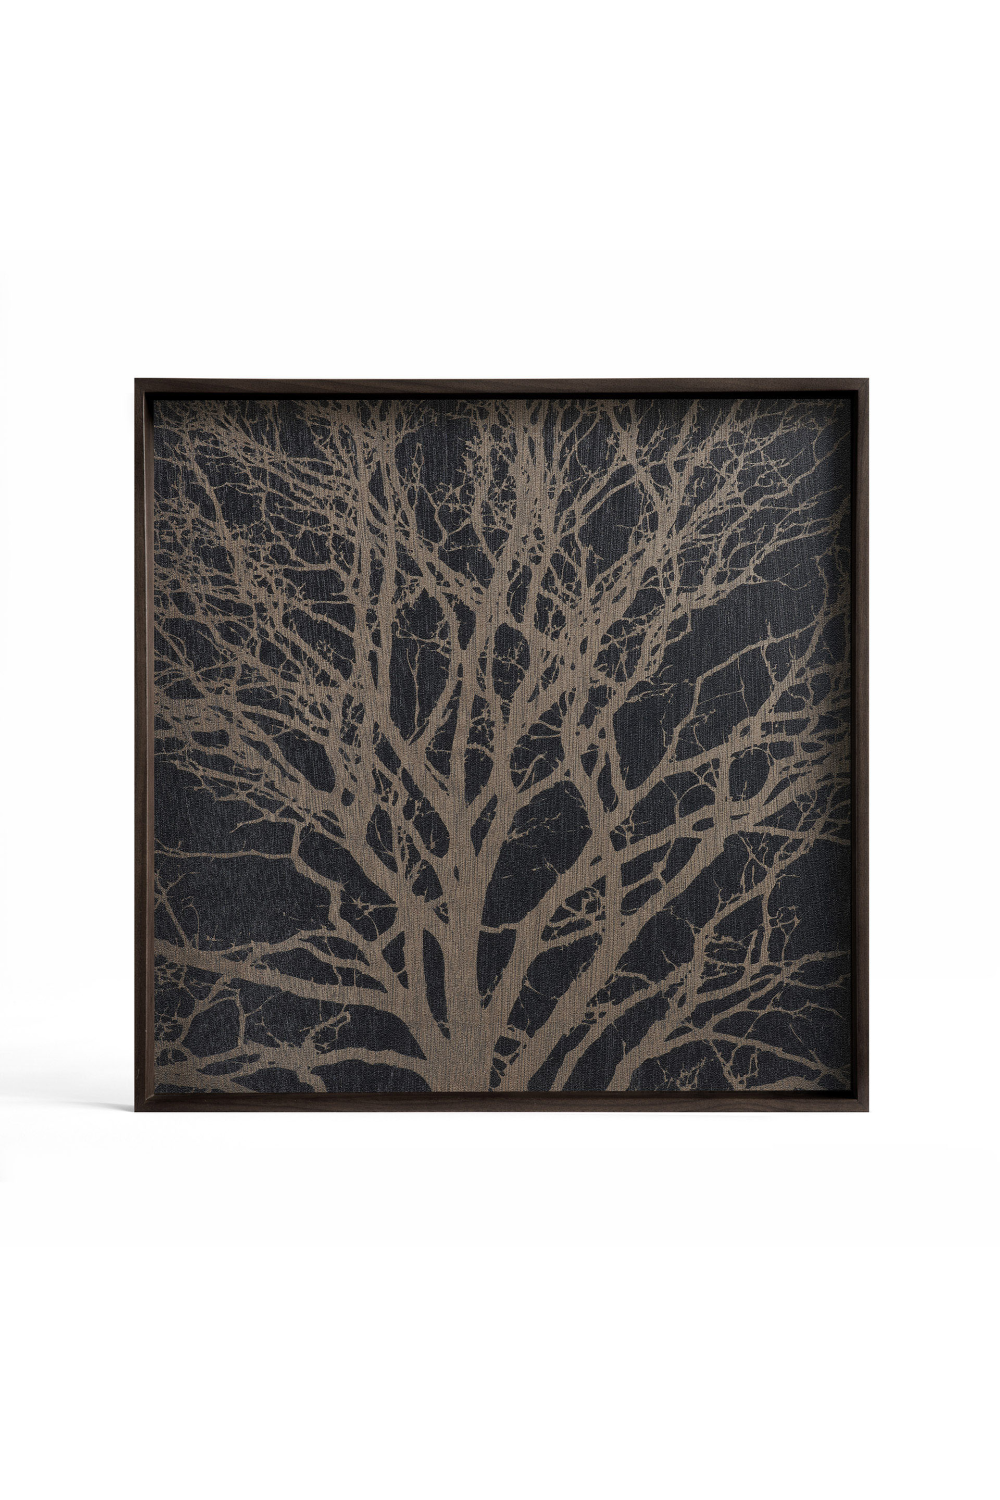 Square Hand-Painted Wooden Tray | Ethnicraft Black Tree